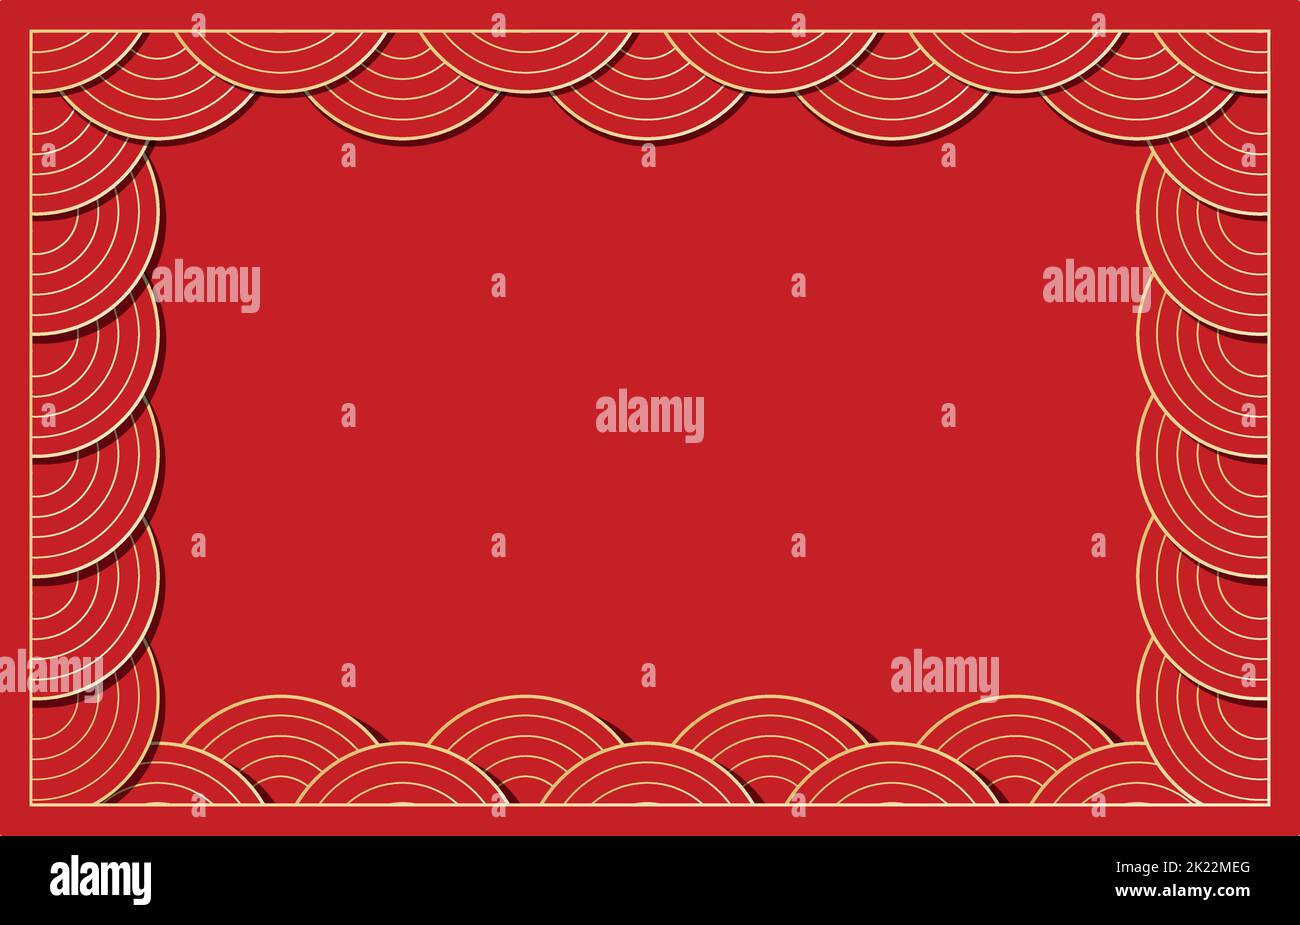 Vector flat festive illustration with copy space. Horizontal template for Chinese New Year banner in traditional red, gold colors. Frame is created fr Stock Vector